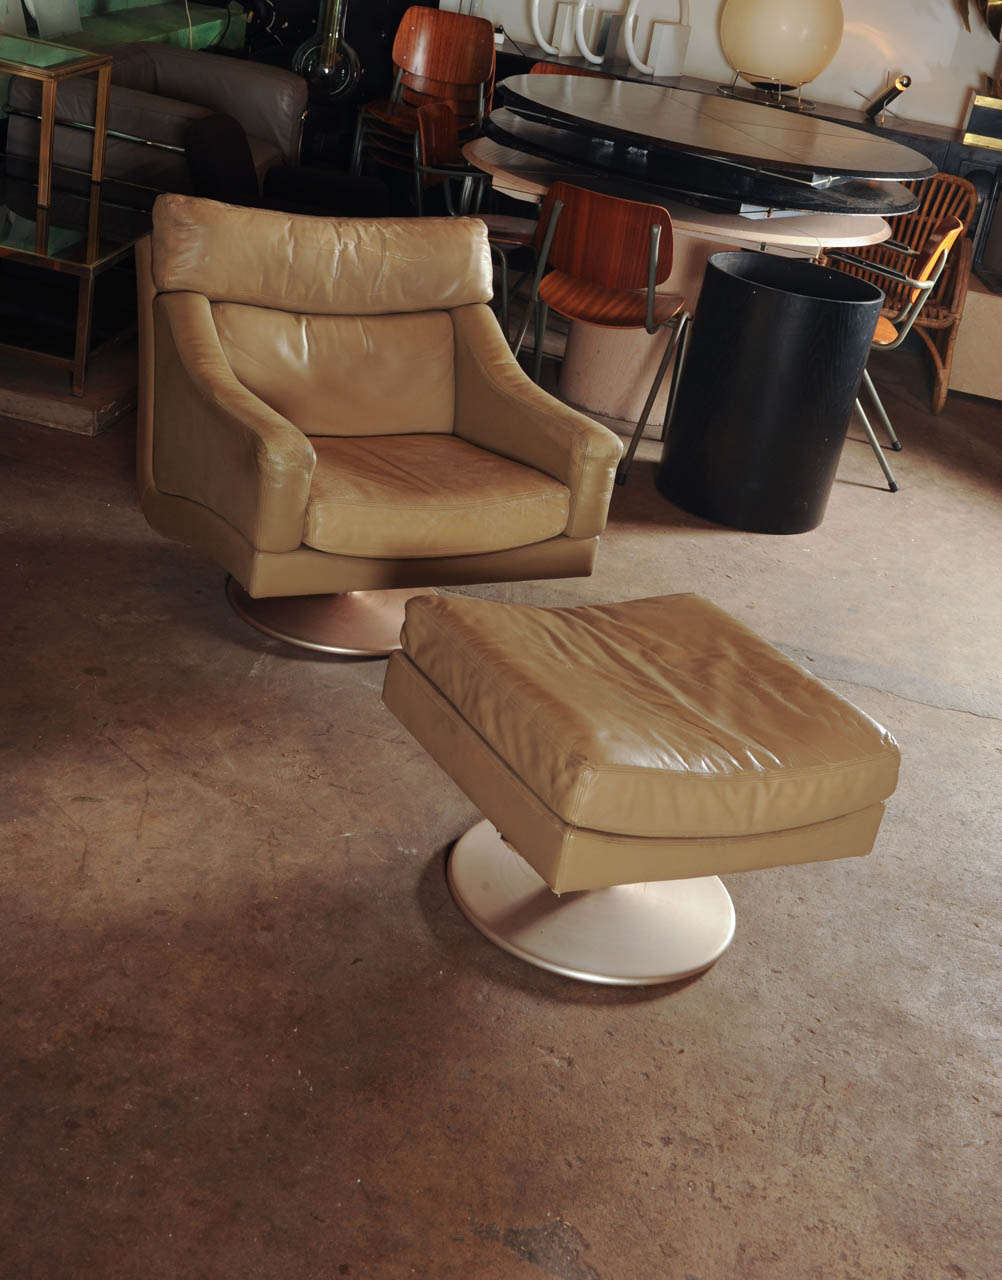 Very comfortable set of a beautiful tanned leather lounge chair and it's hocker. Rathe rin the style of Clockwork Orange. They both swivel on a distinctive trumpet shaped base. Although it looks like it, it is is not by De Sede; but it is a very